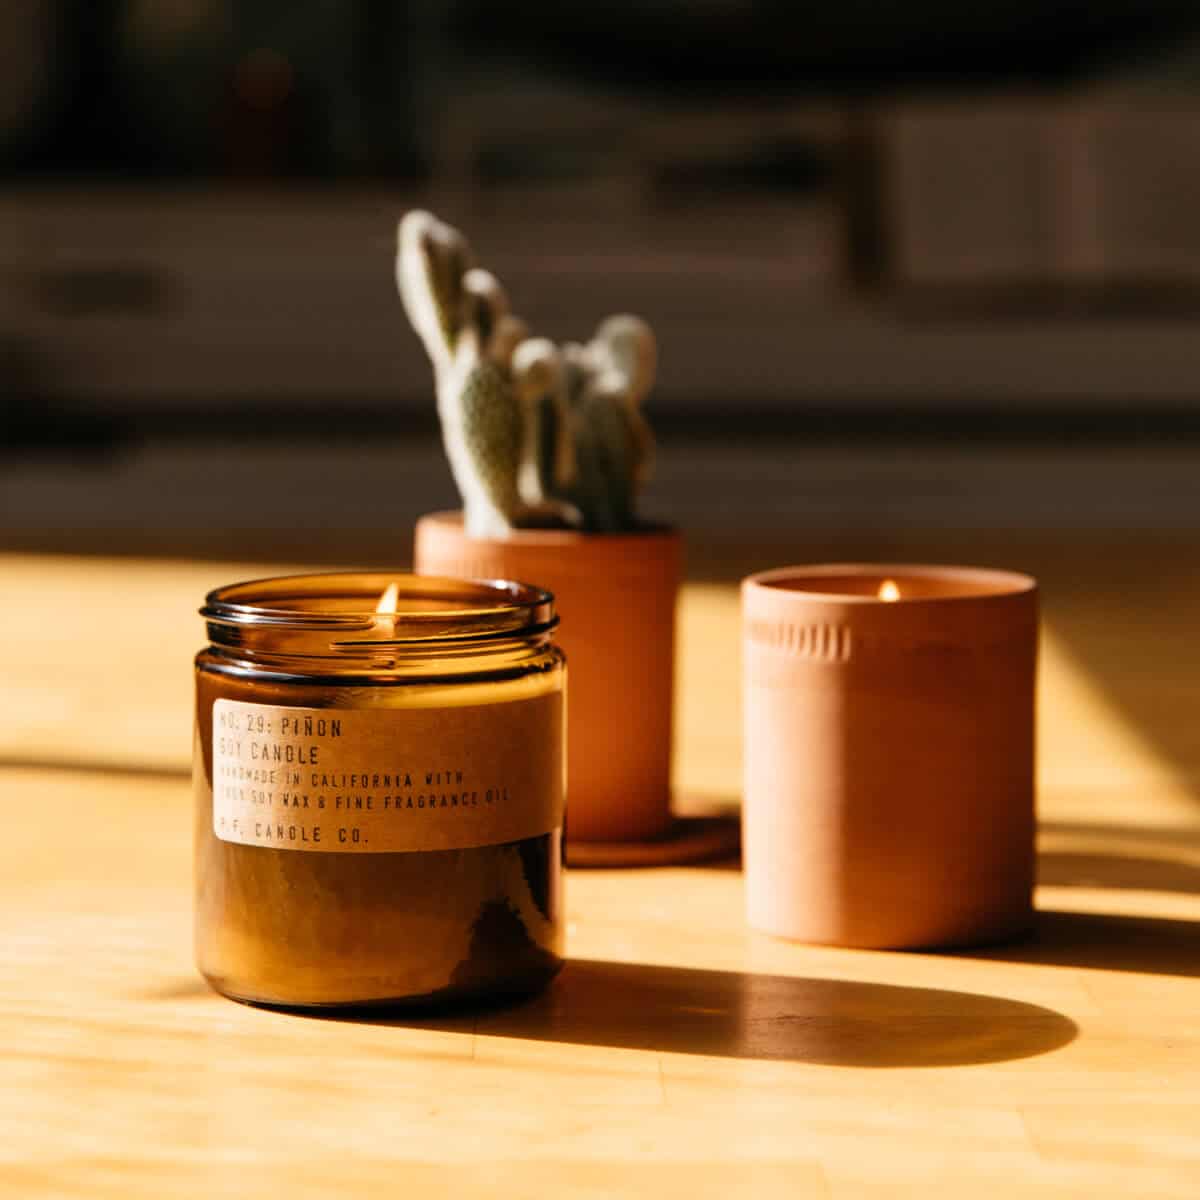 P.F. Candle Co. No.29 Piñon Scented Candle - Osmology Scented Candles & Home Fragrance